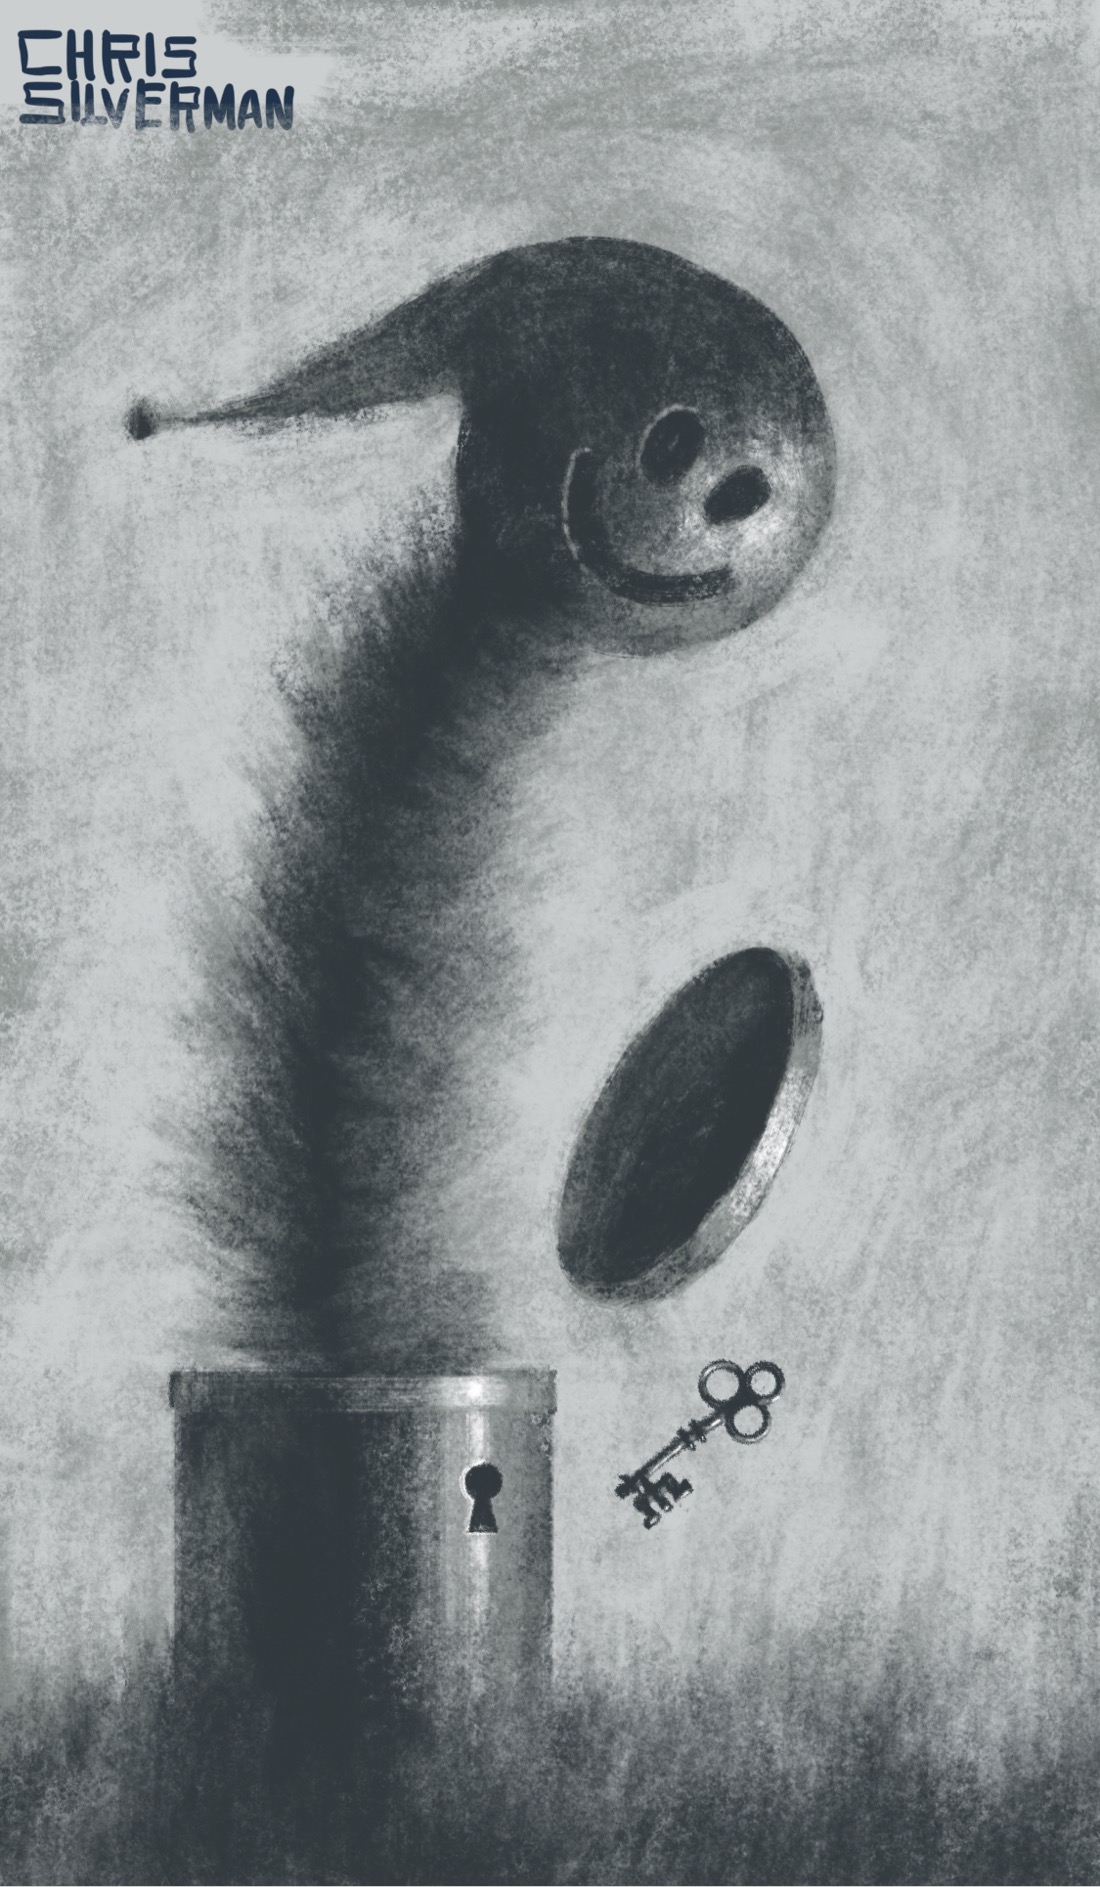 A black and white charcoal drawing of a blurry meadow with a thick metal pipe sticking up out of it. On the right side of the pipe is a small keyhole. Exploding up out of the top of the pipe is a jack-in-the-box-looking creature. Its body is blurry, almost as though it is made of smoke or extremely furry. Its head looks like a bowling ball with a smiley-face embossed on it. It has a pointed jester's cap with a bell. Mid-air is a round lid that must have been on the pipe before the creature blew it off. Also mid-air is a key, ejected from the keyhole.